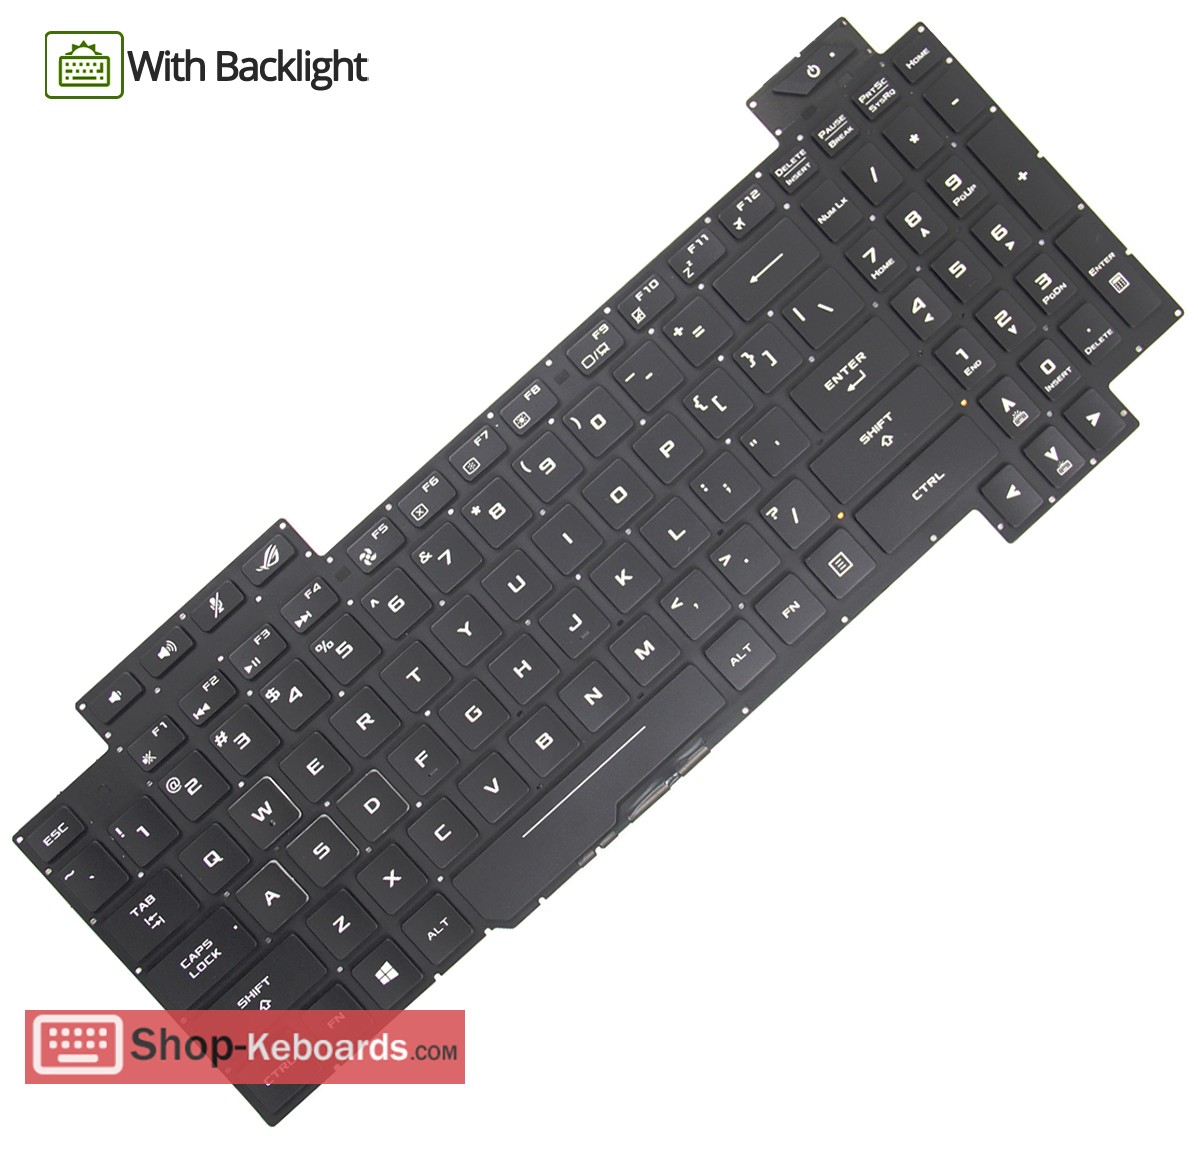 Asus 0KNB0-661ASP00 Keyboard replacement